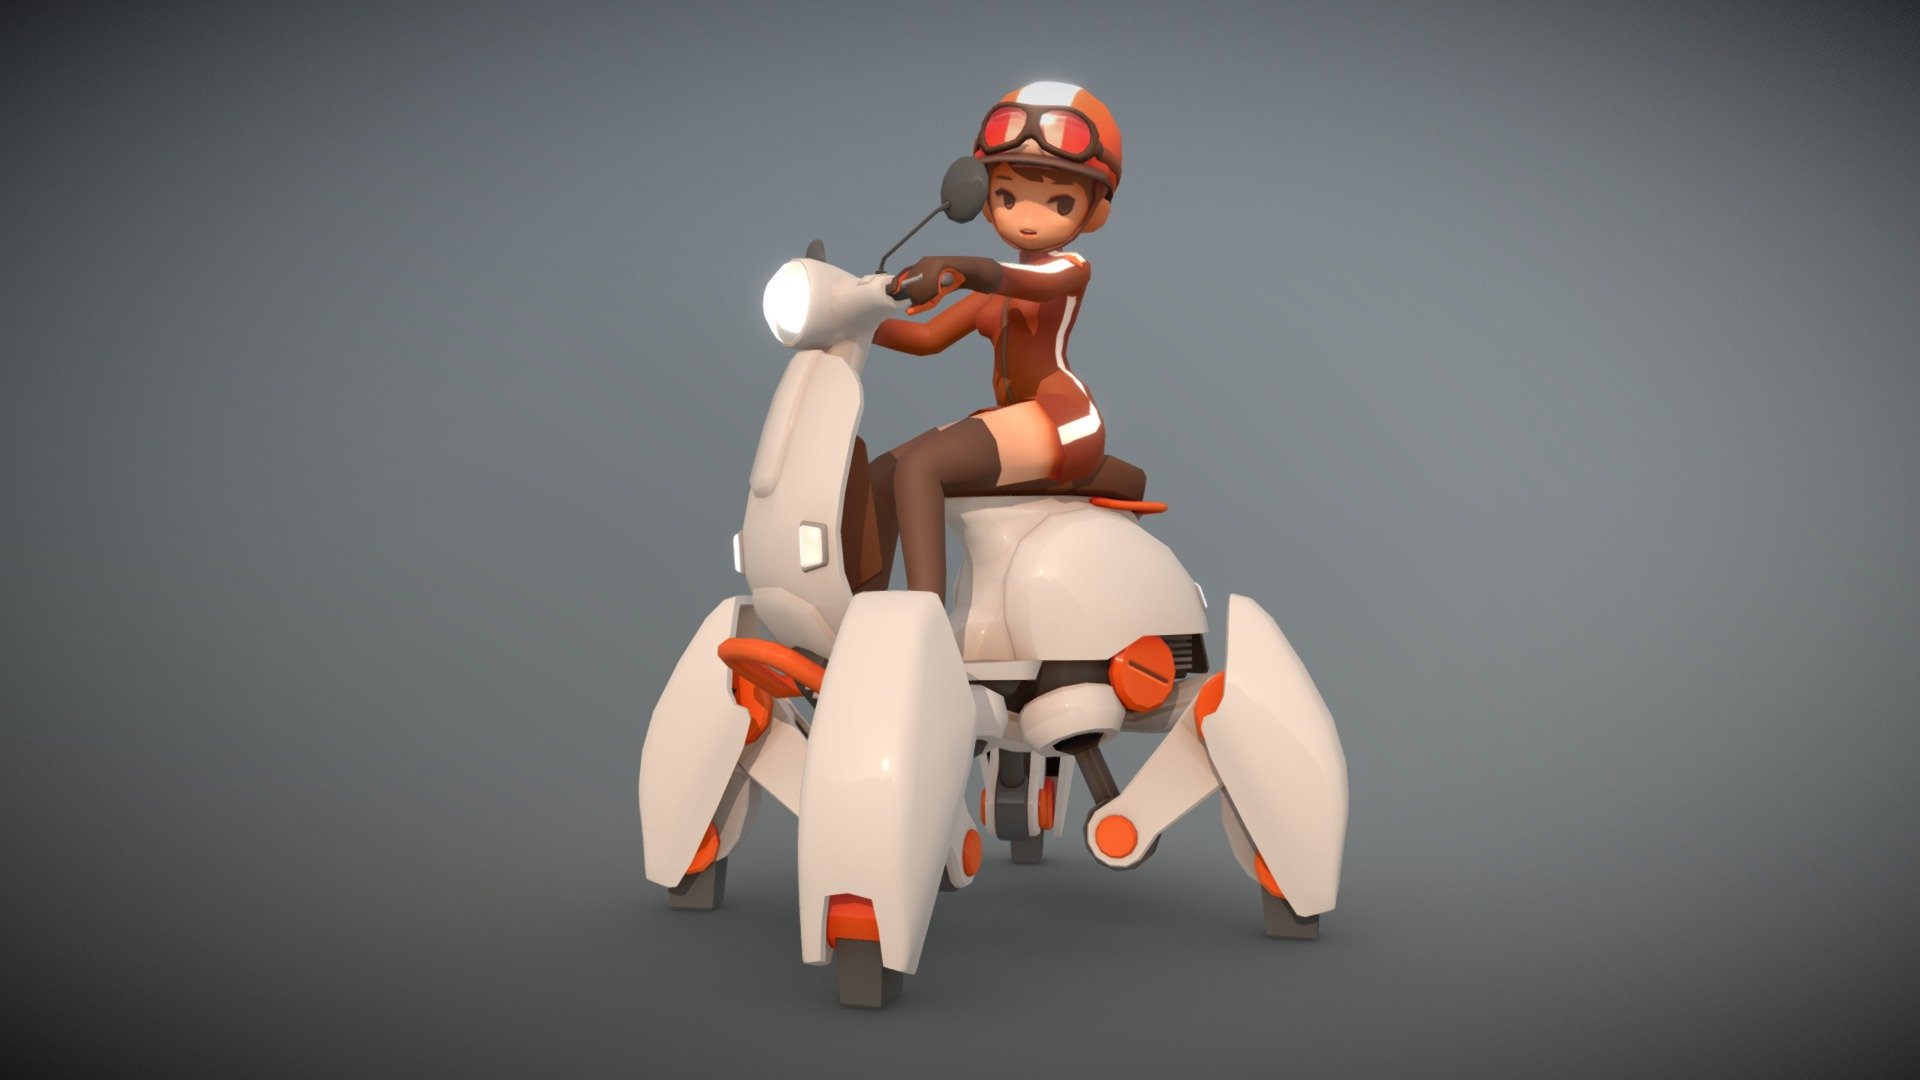 From a retro-scifi game that never got made~

The vehicle was supposed to be electric&hellip; then I forgot about it while using a reference photo of a vespa. Too lazy to fix it again.

www.togglegear.com


- Its legs have rubber tips as default, but can change it to a metal tip when going off-road. It automatically changes its walking style depending on speed and terrain. Or can be manually changed by vocal commands. It's more like horse-riding than driving a motorcycle.- - ATV - 3D model by nuulbee 3d model